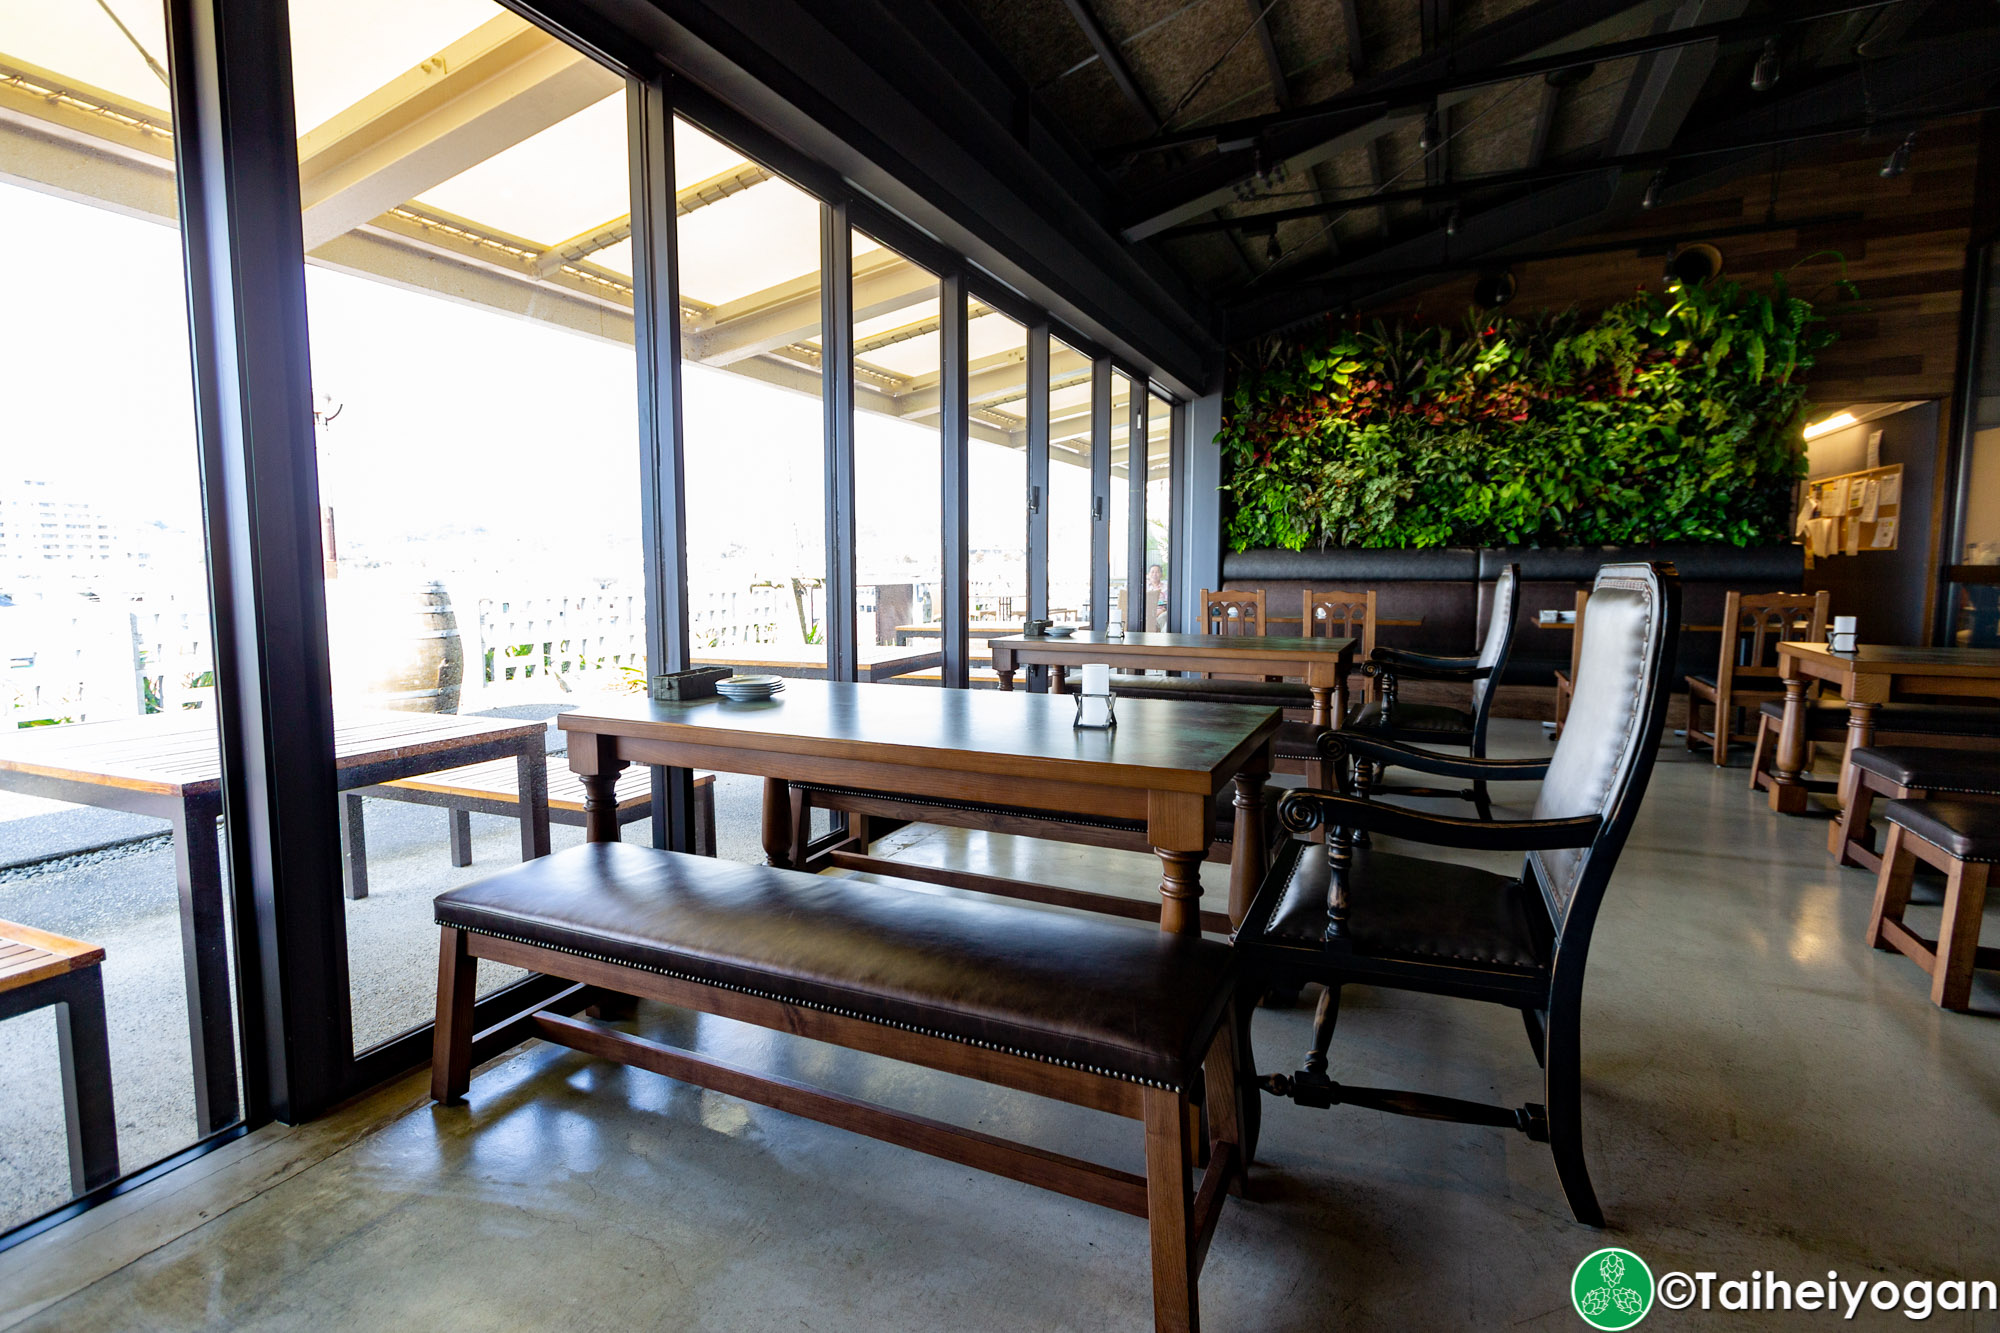 Chatan Harbor Brewery - Interior - Bar Area - Table Seating